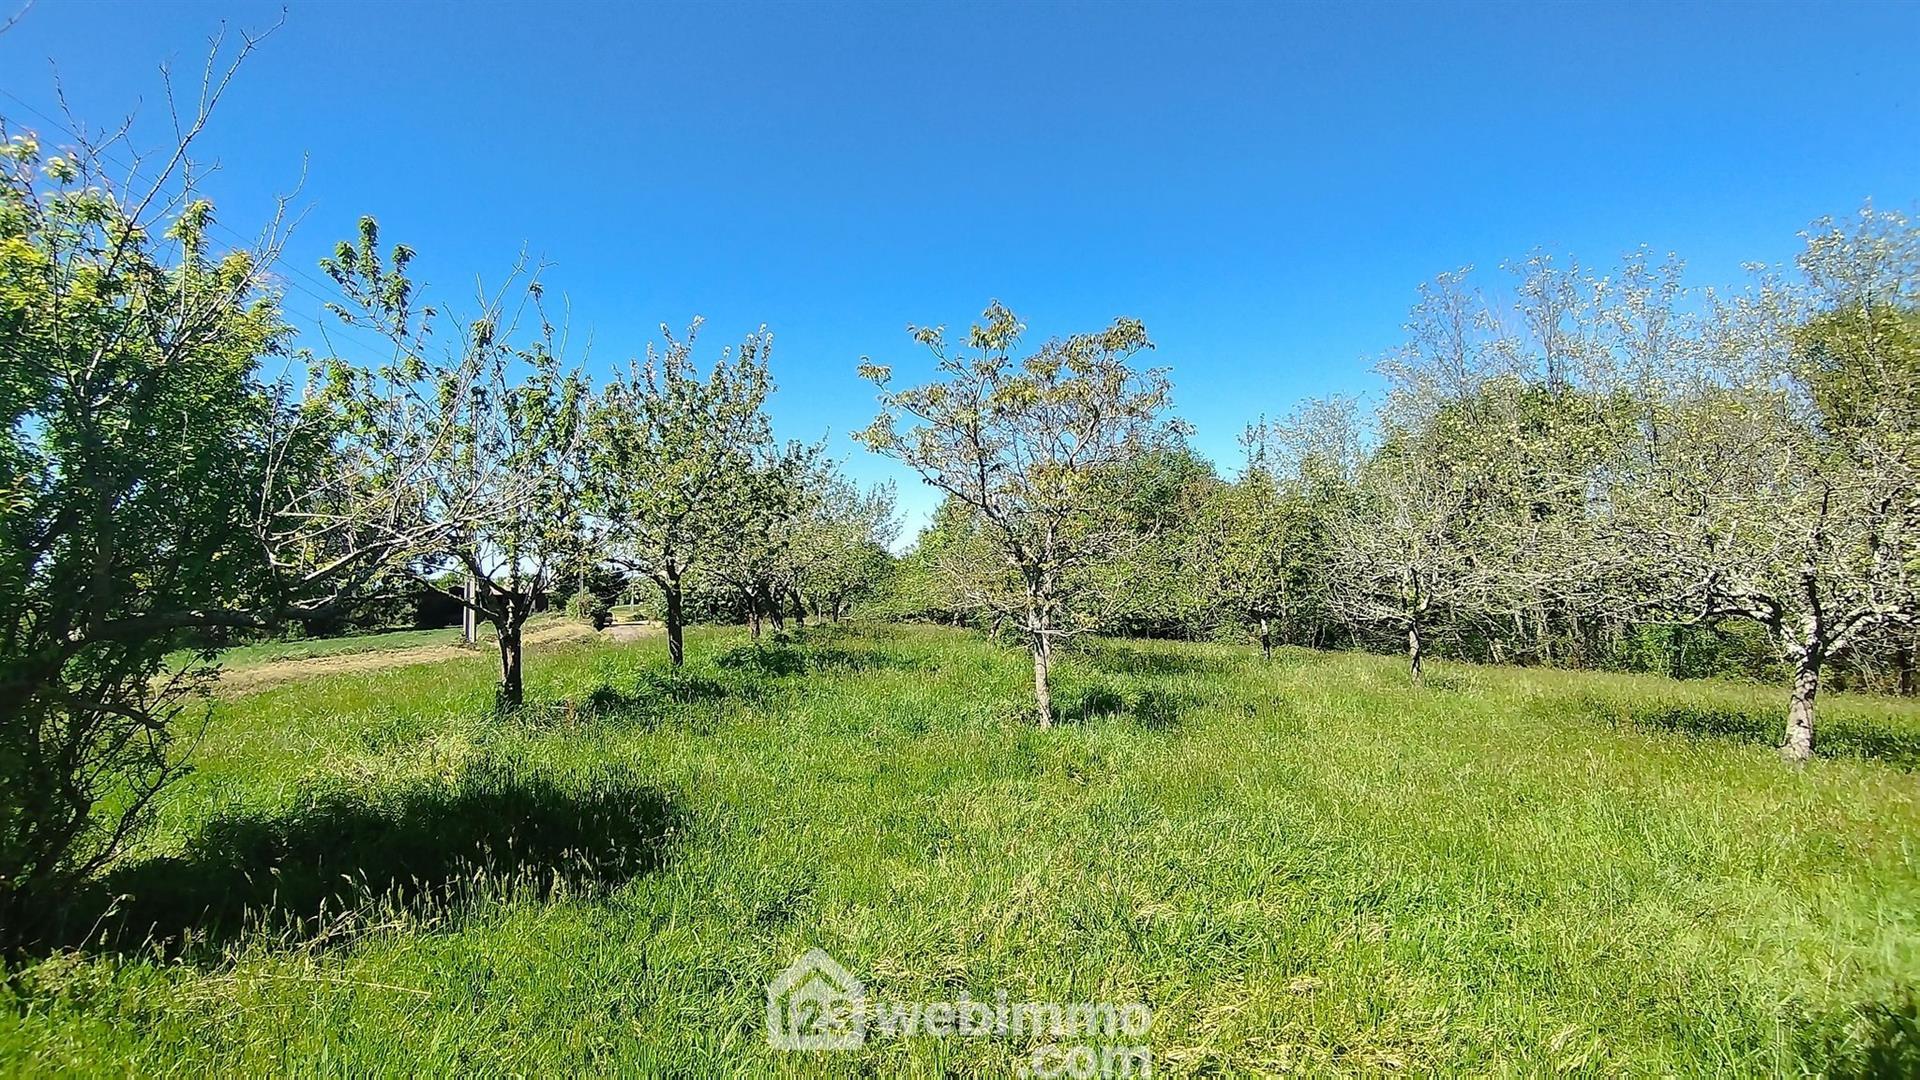 Farmhouse of 234 m² with barn of 250 m² and orchard, on 4 hectares of land - ideal for livestock fa